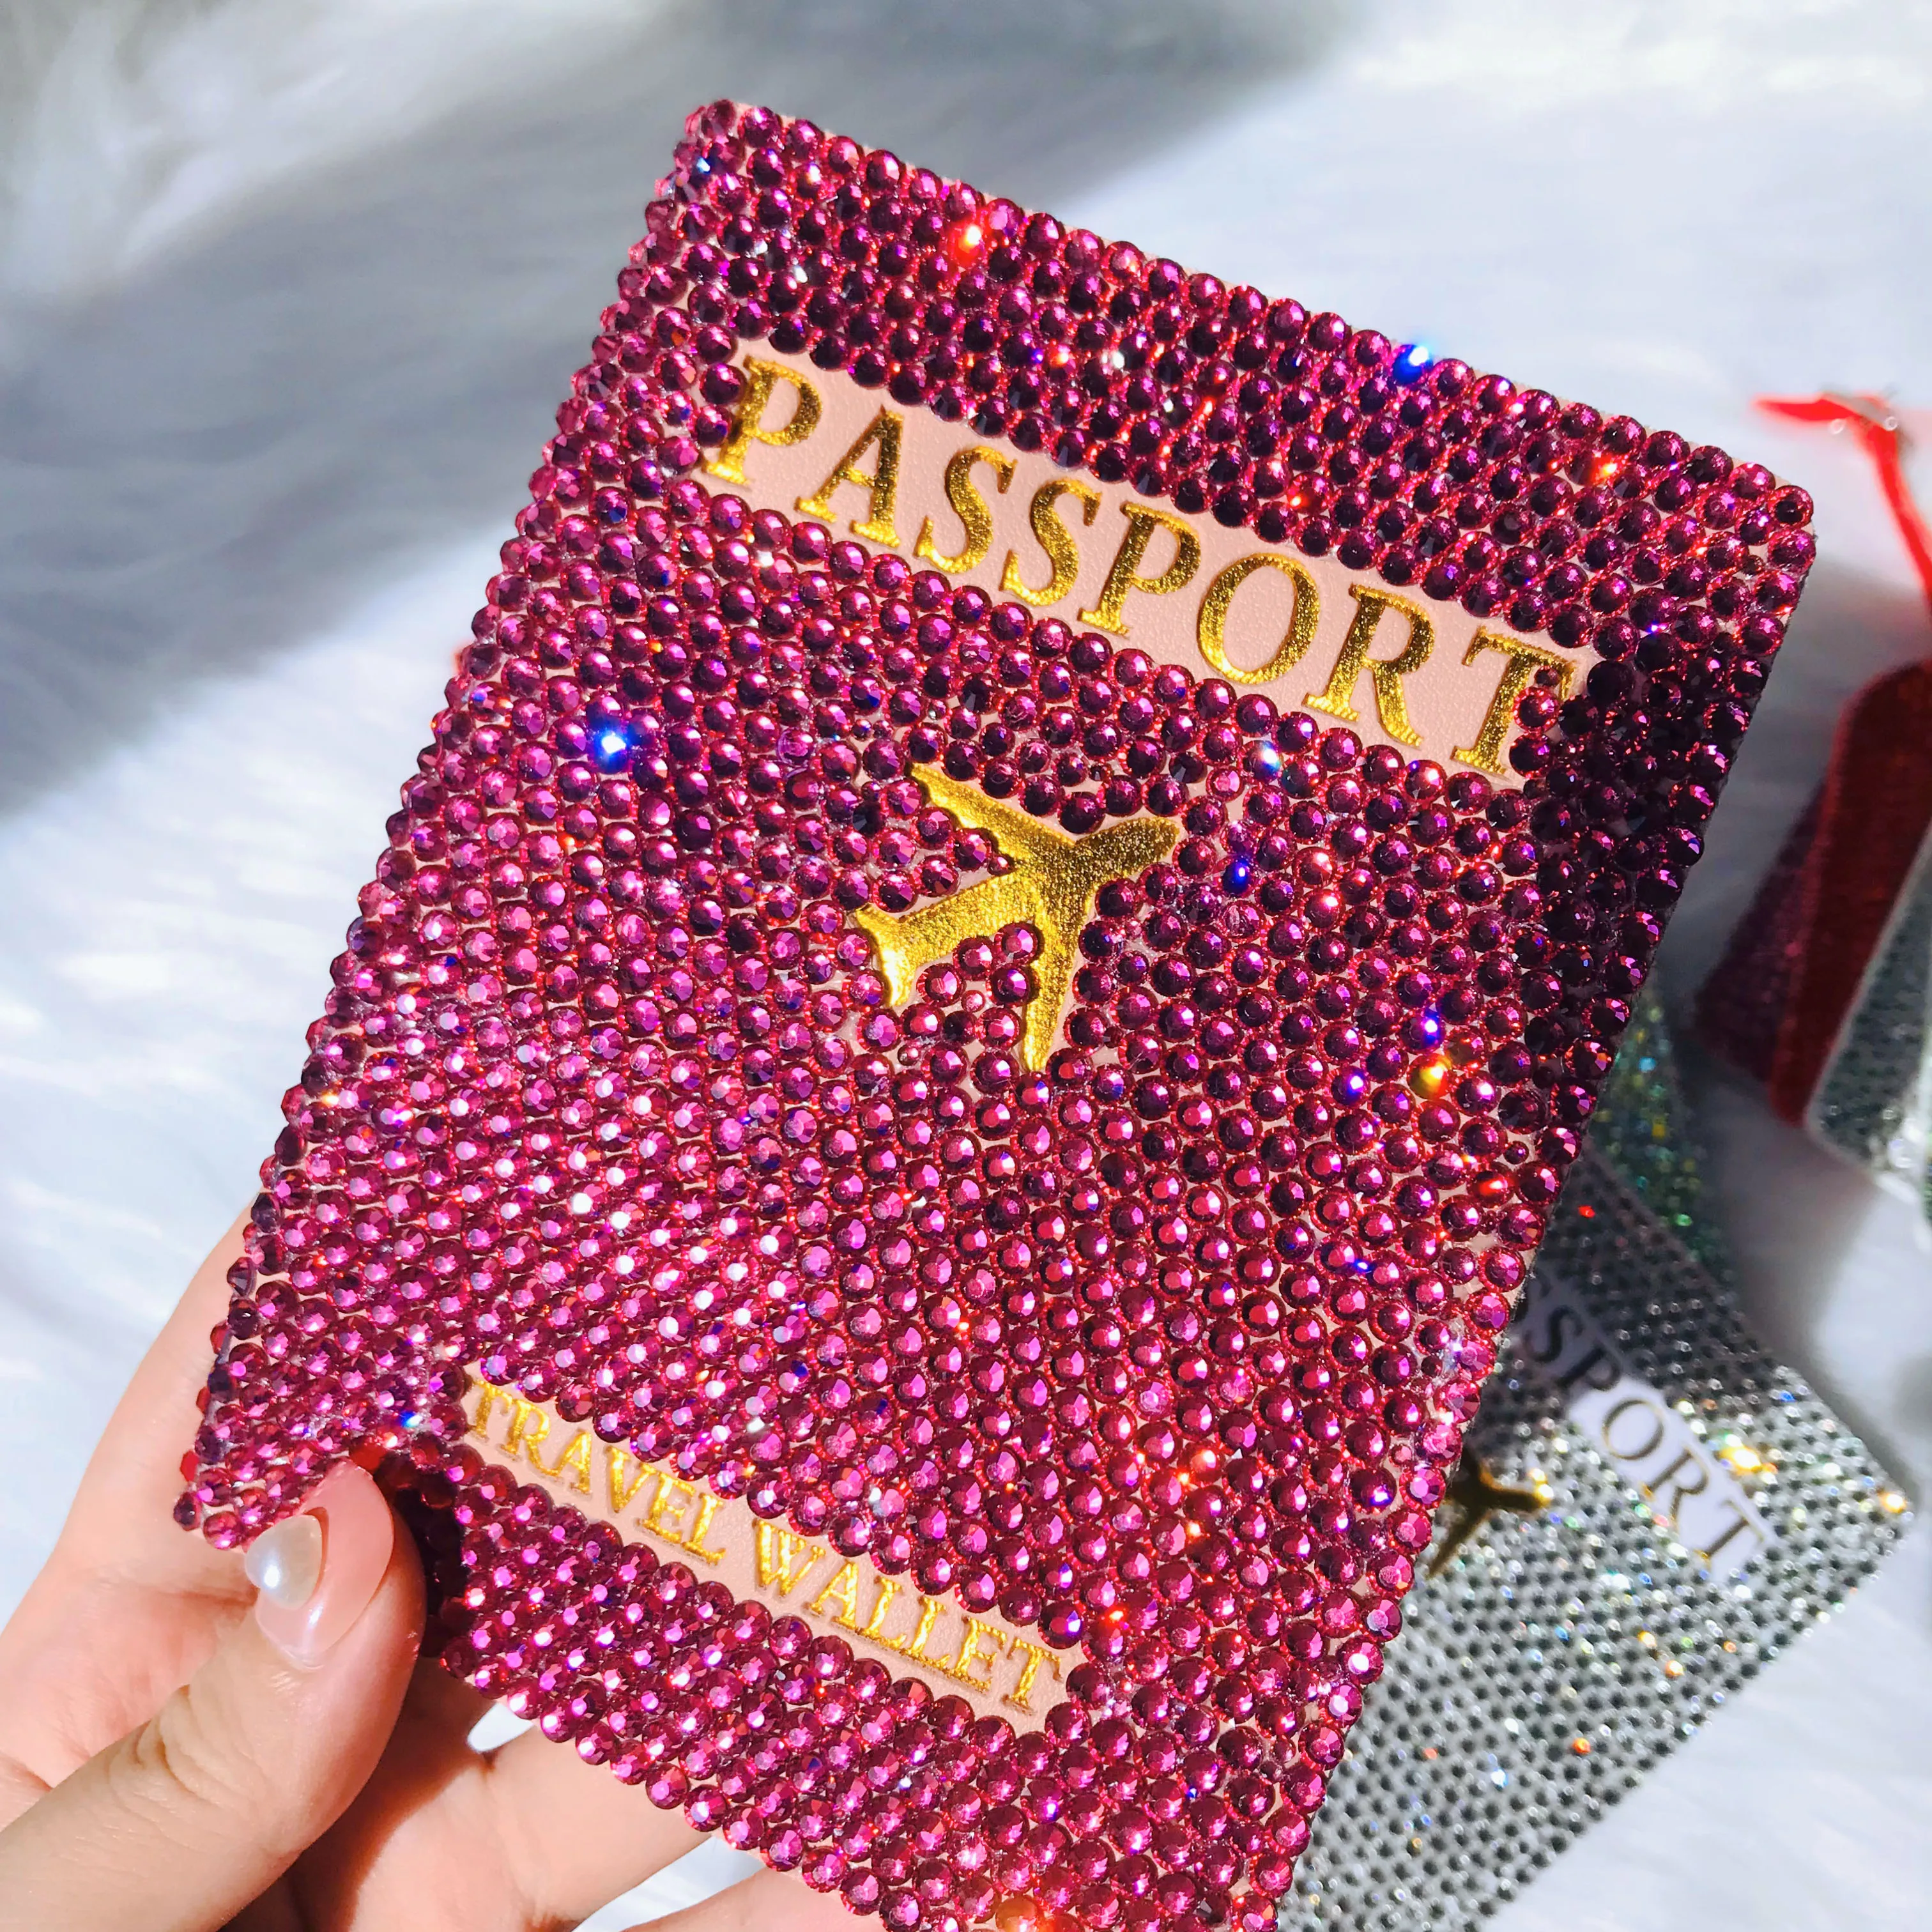 Personalized Passport Cover - Gem Awards